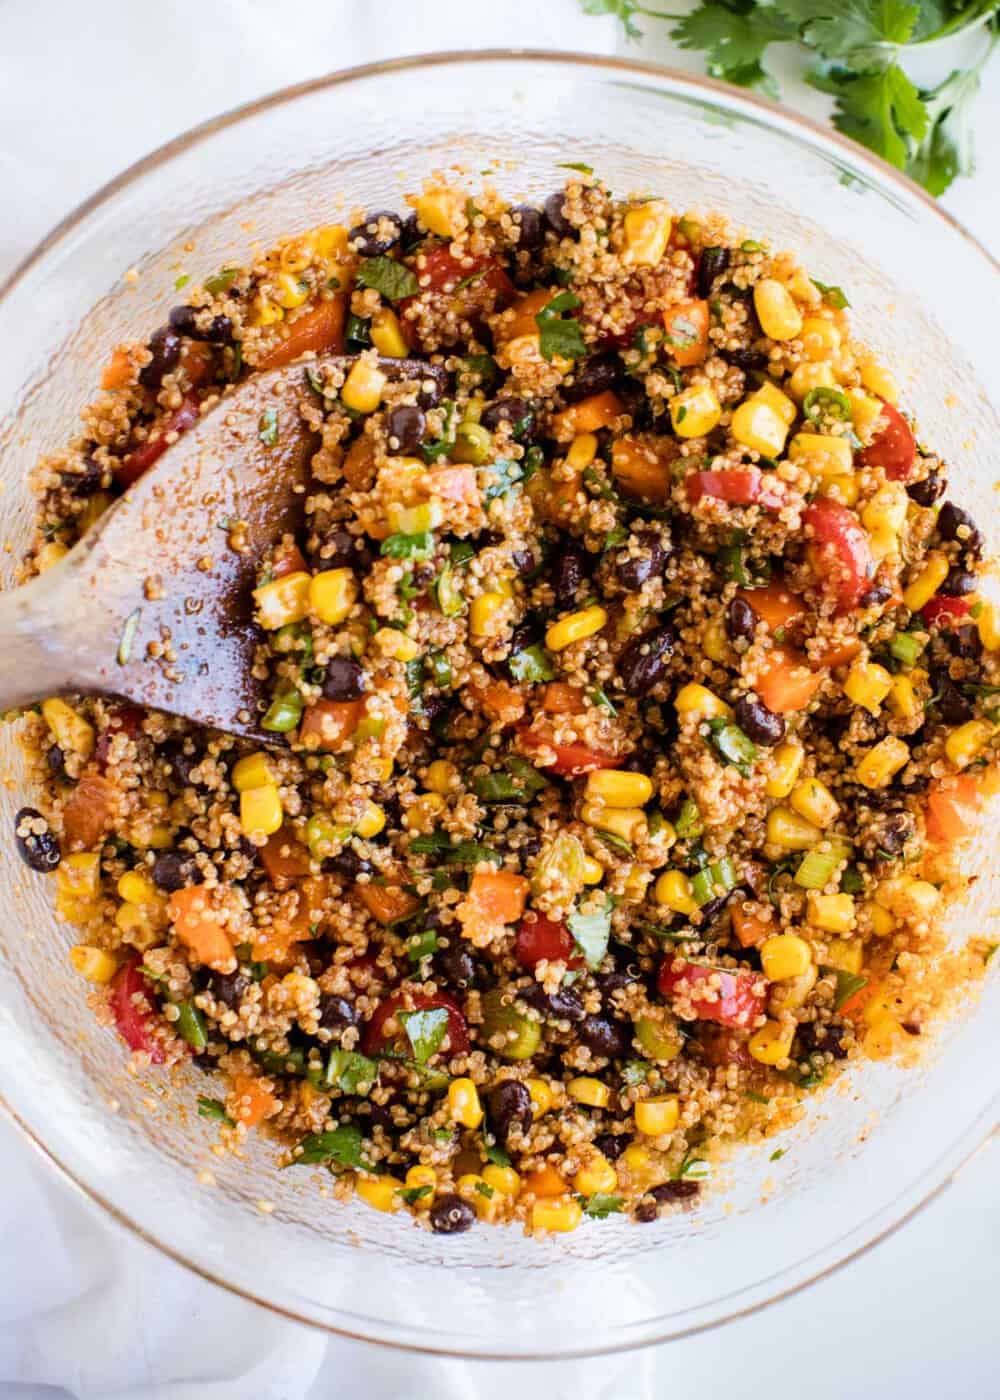 Southwest quinoa salad in bowl with wooden spoon.